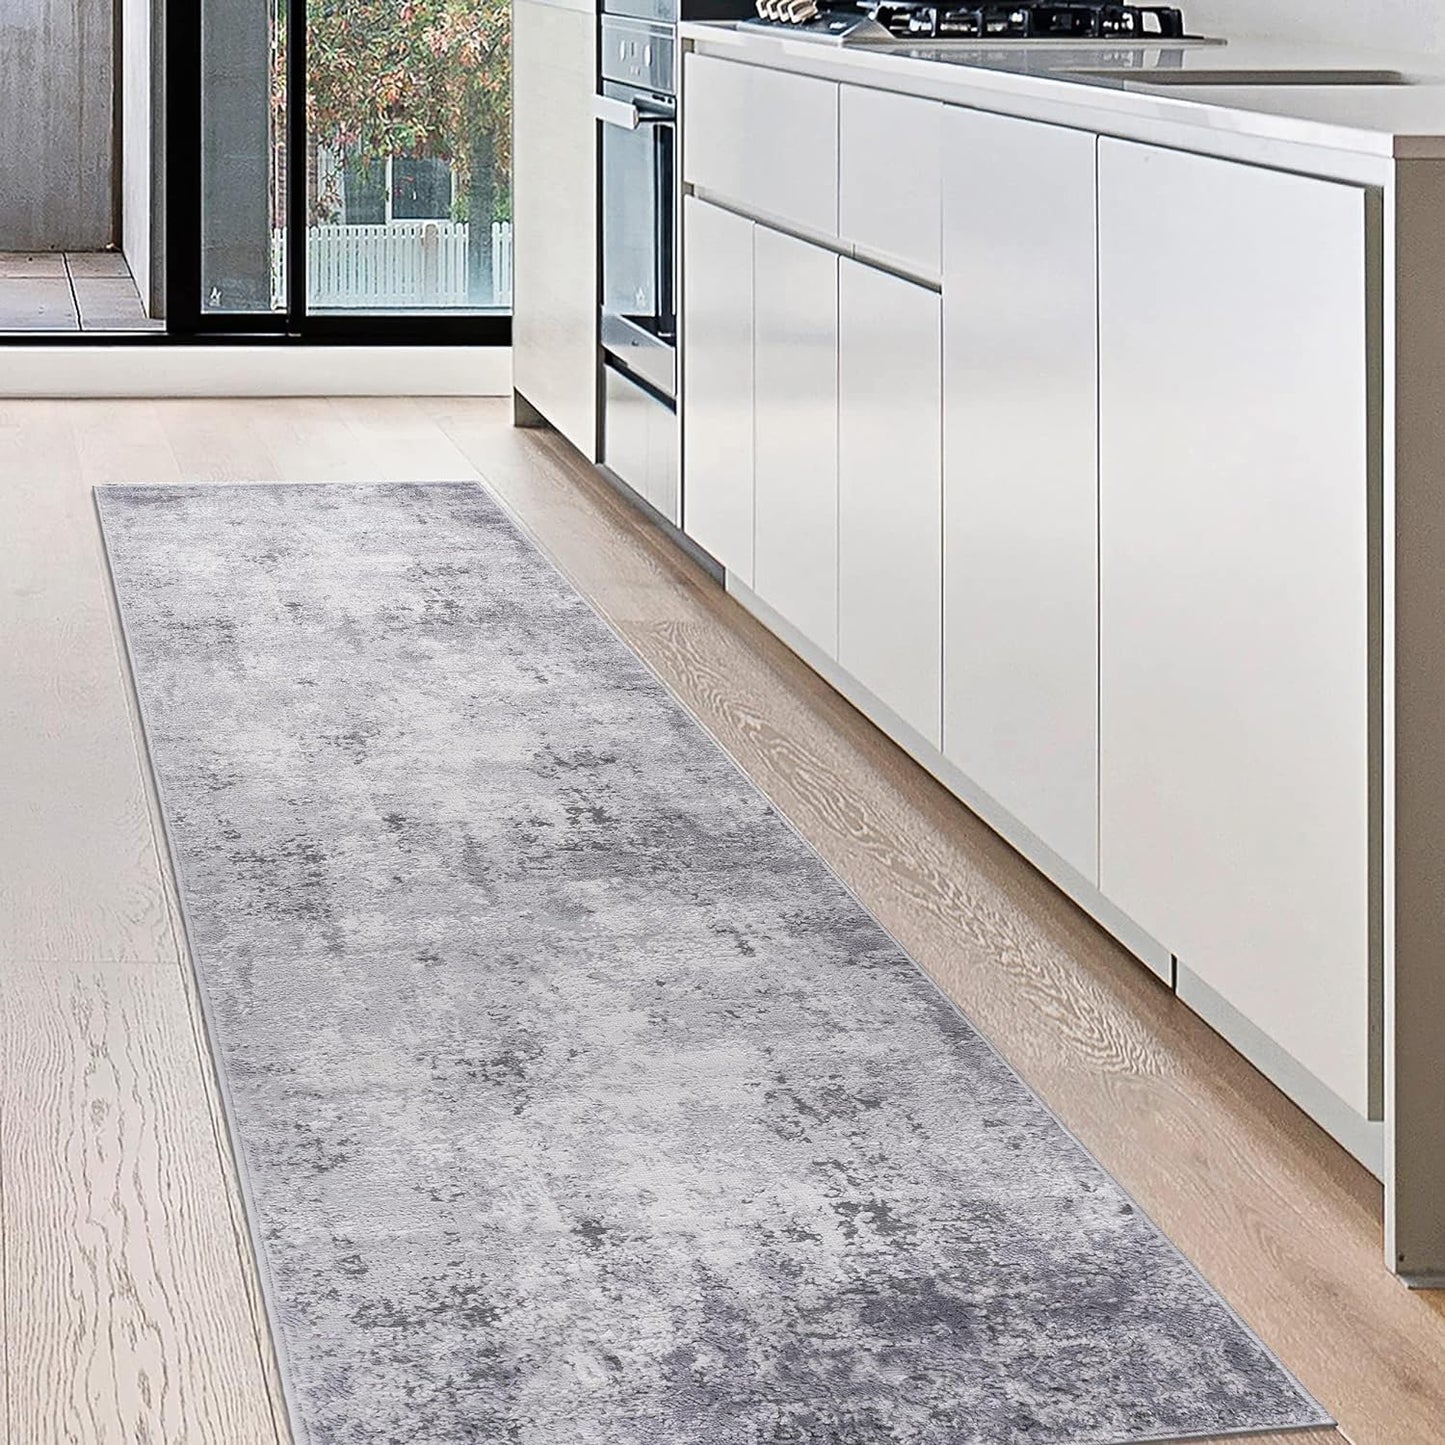 NAAR MARFI Collection Light Grey/Abstract Non-Shedding Living Room Bedroom Dining Home Office Stylish and Stain Resistant Area Rug